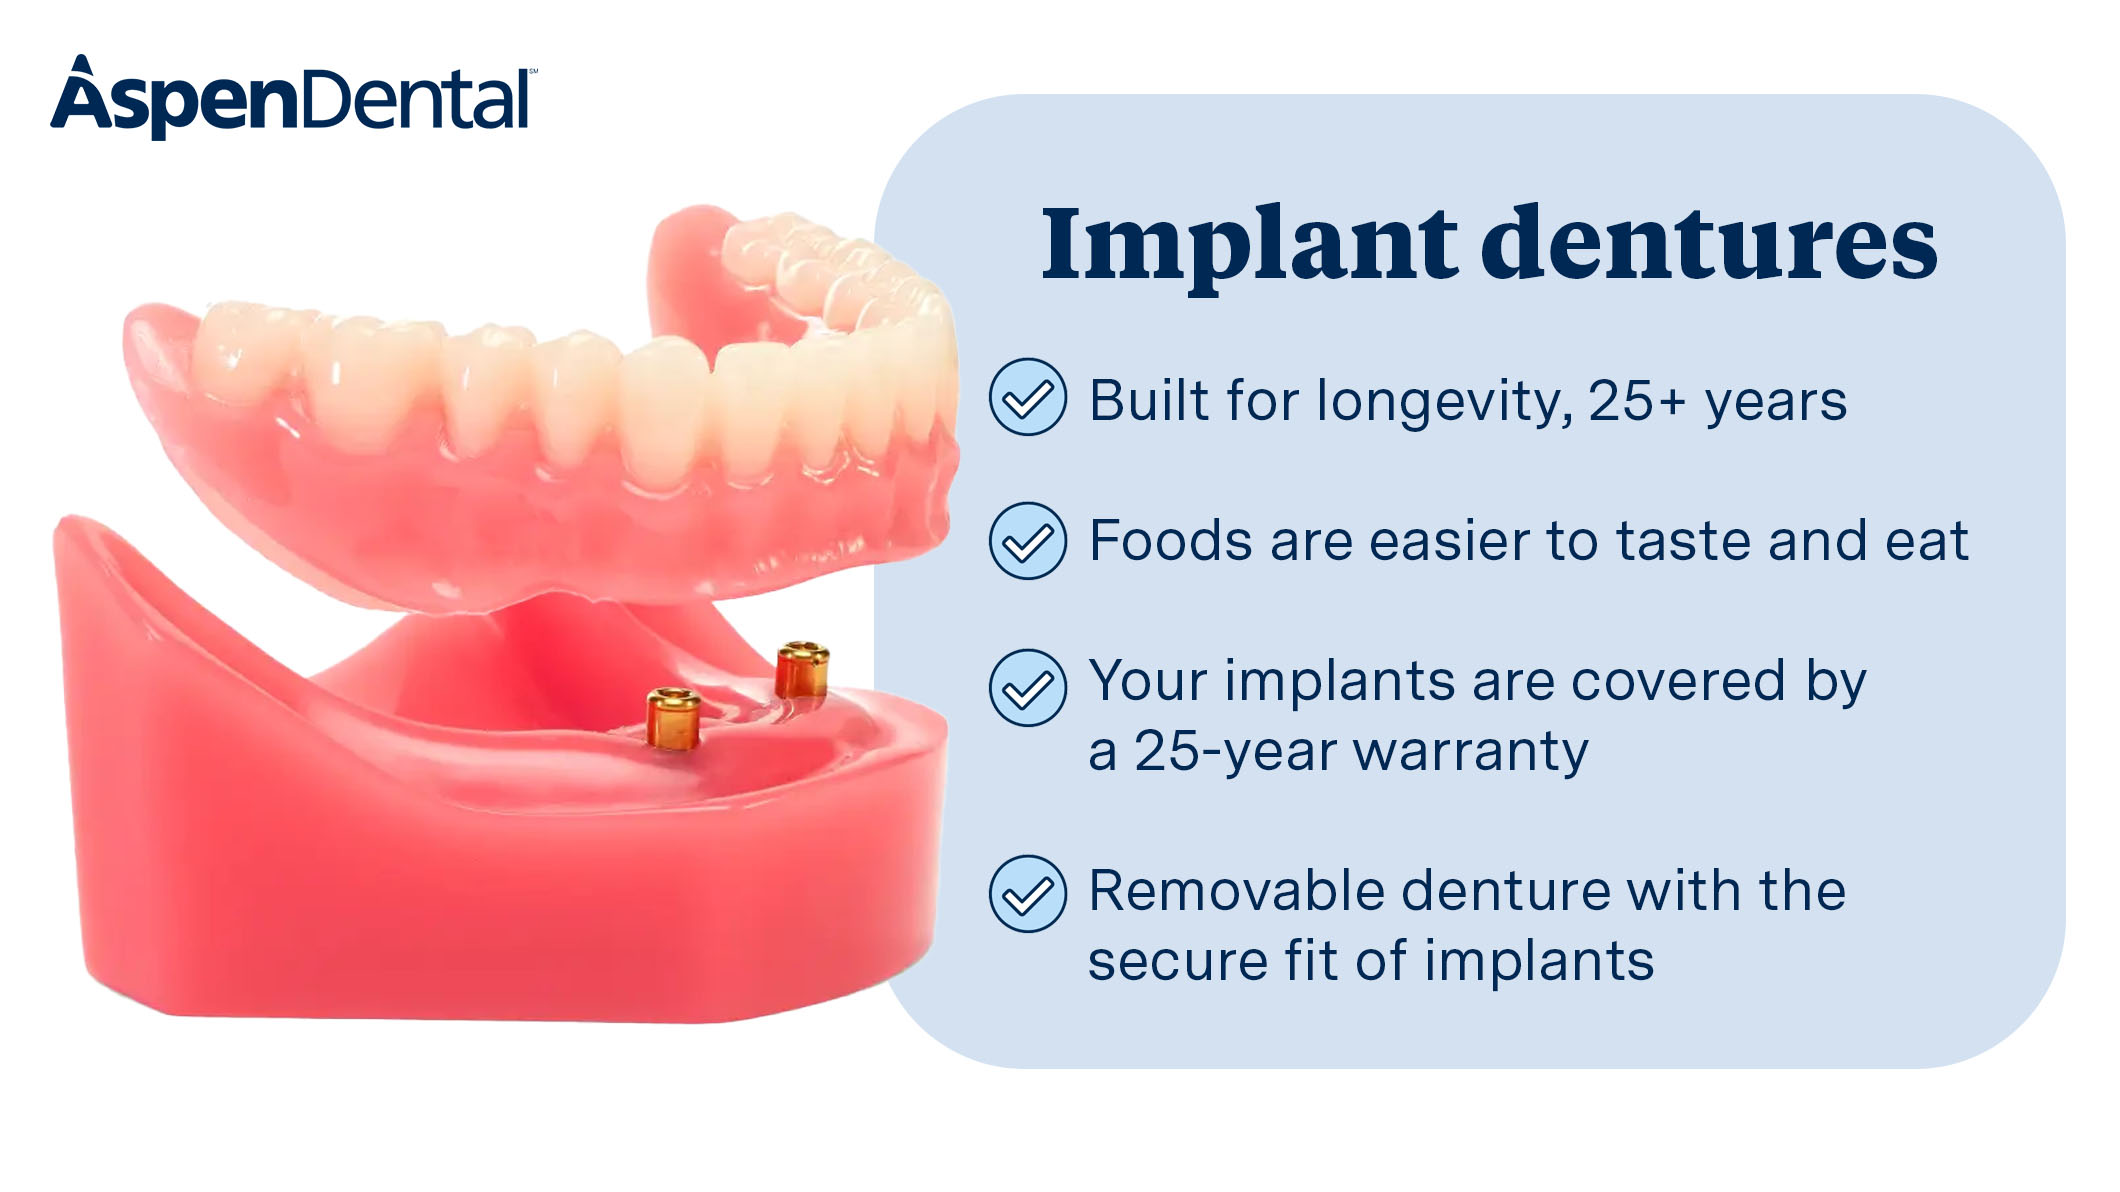 Our implant dentures offer a natural feel and titanium-stabilized security. Easily snaps into place  Aspen Dental - Belle Vernon, PA Belle Vernon (724)929-4939